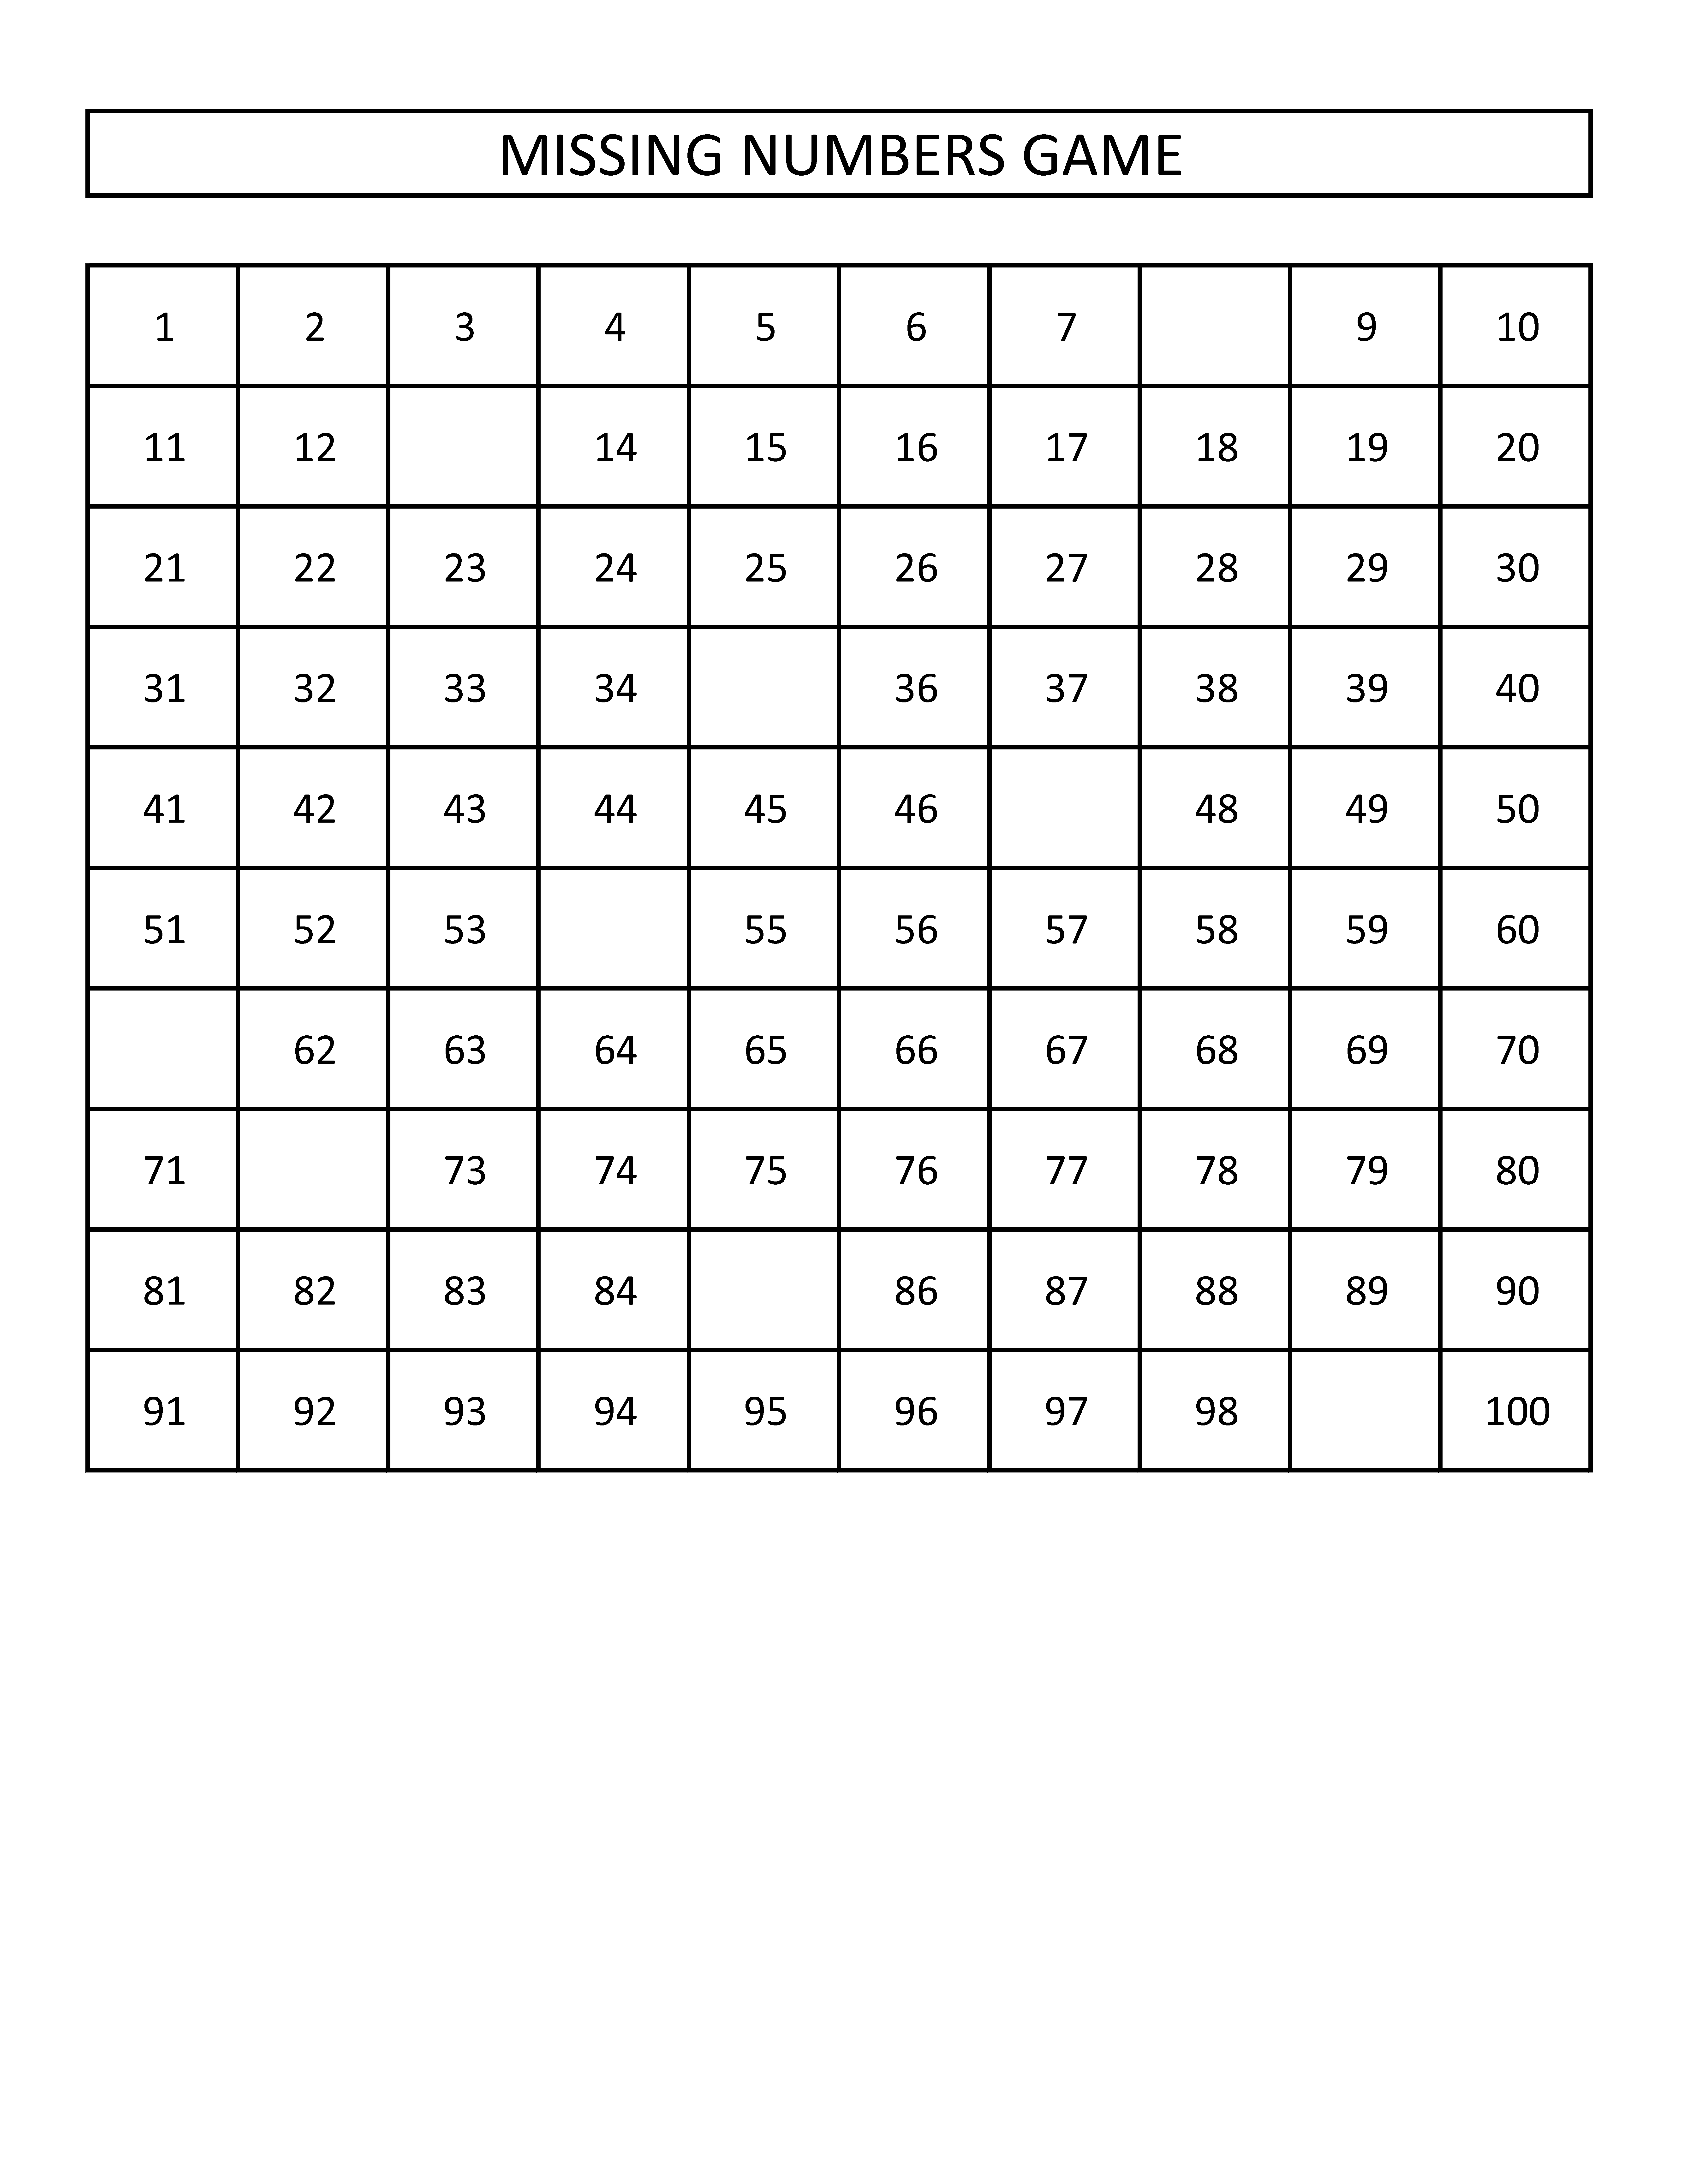 Missing Numbers Game main image